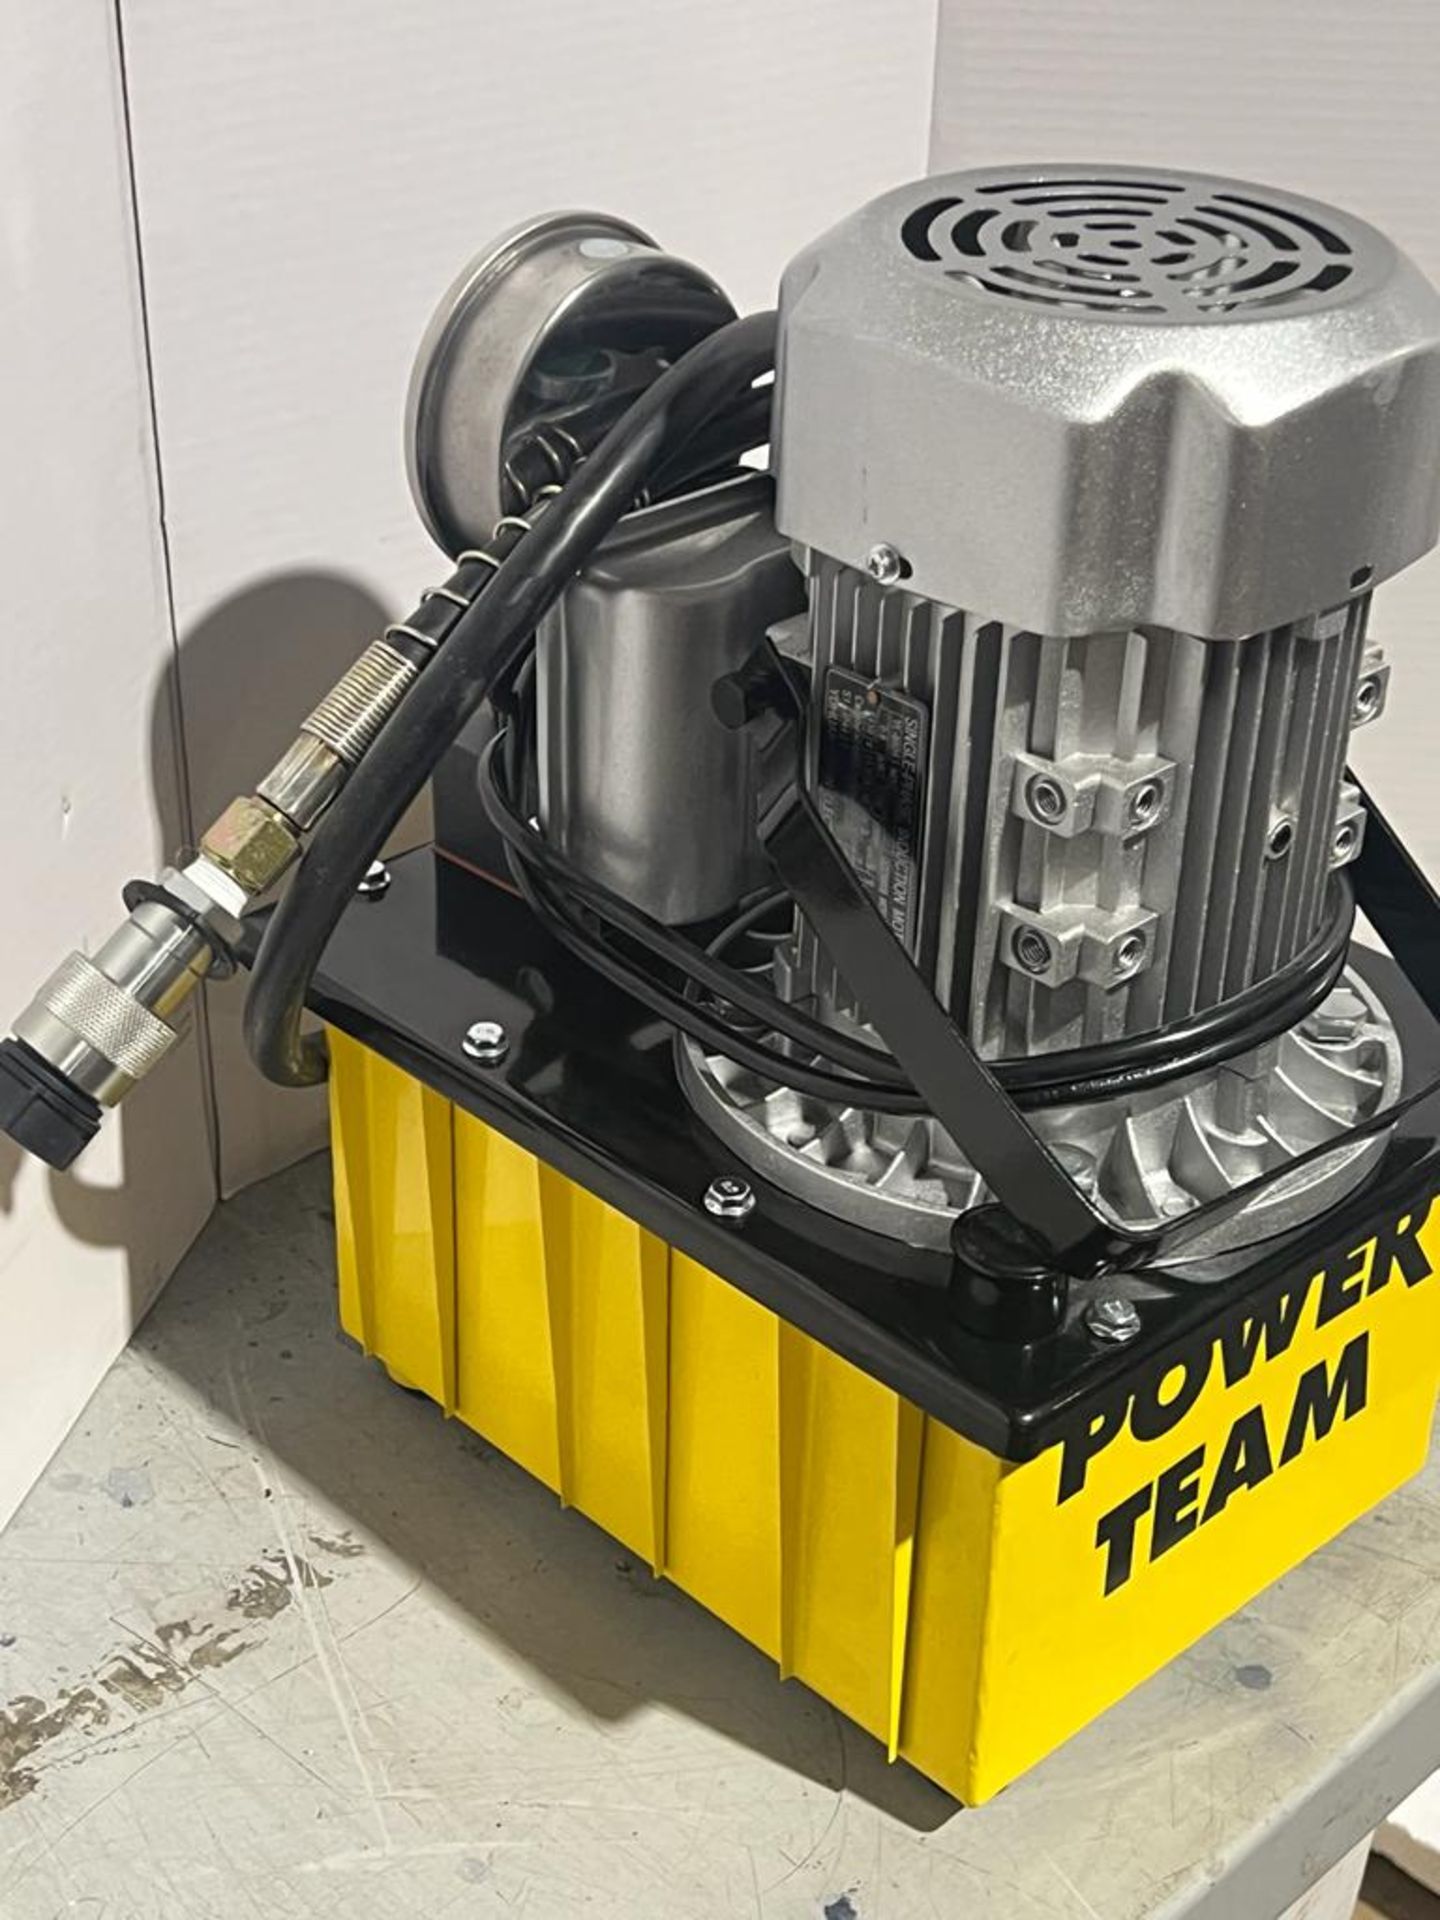 Power Team Hydraulics Electric Powerpack type - 120V single phase hydraulic pump - UNUSED & MINT - Image 2 of 3